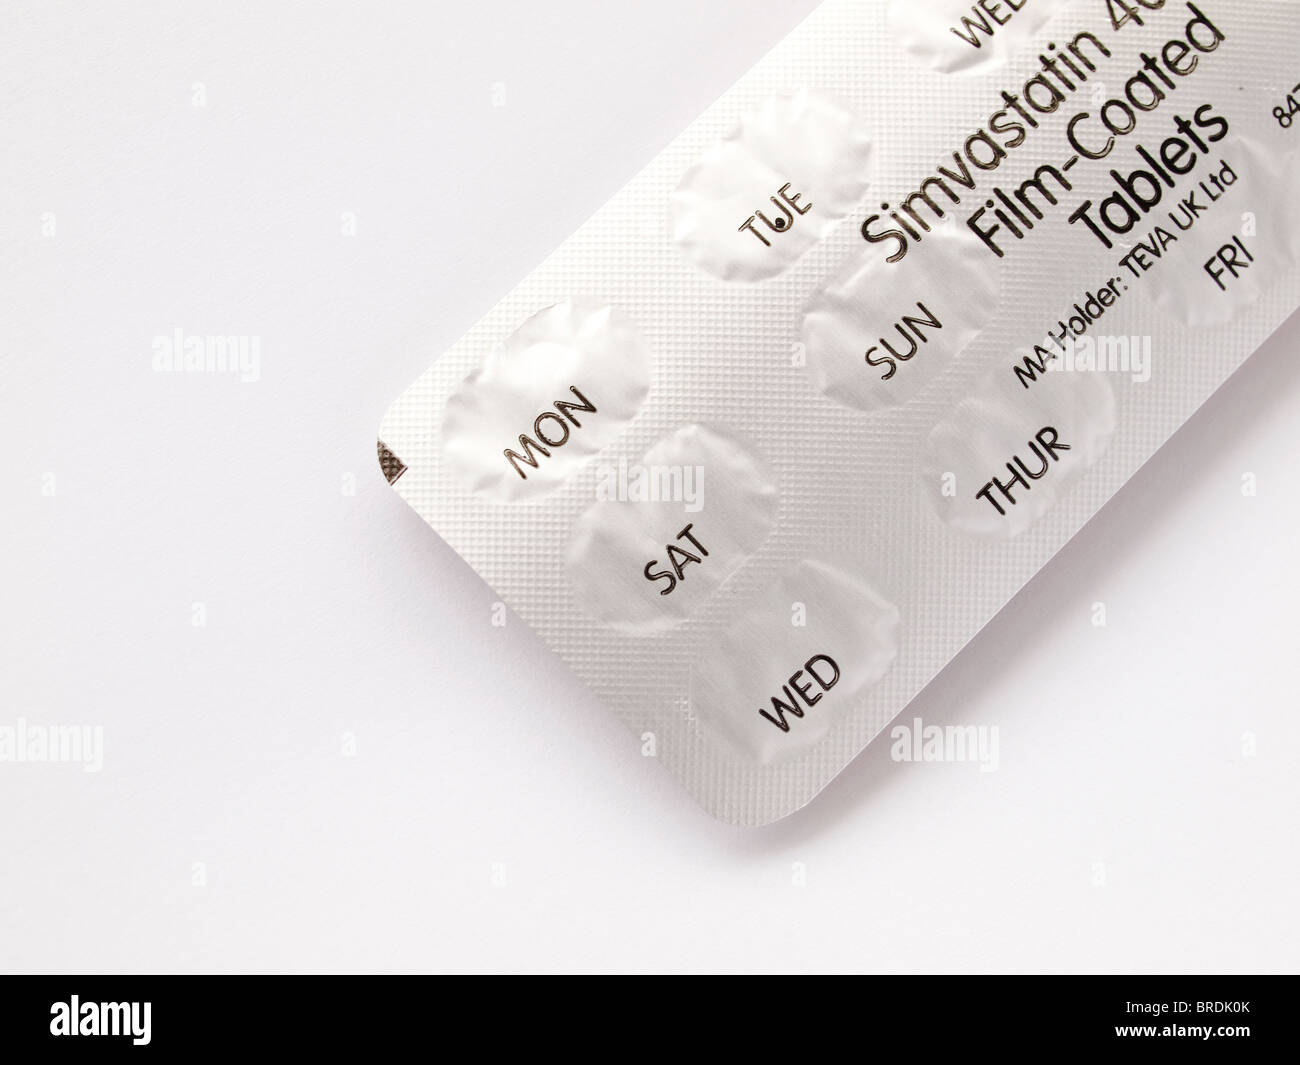 Simvastatin tablets to reduce Cholesterol by daily dose with packaging showing days as a reminder Stock Photo